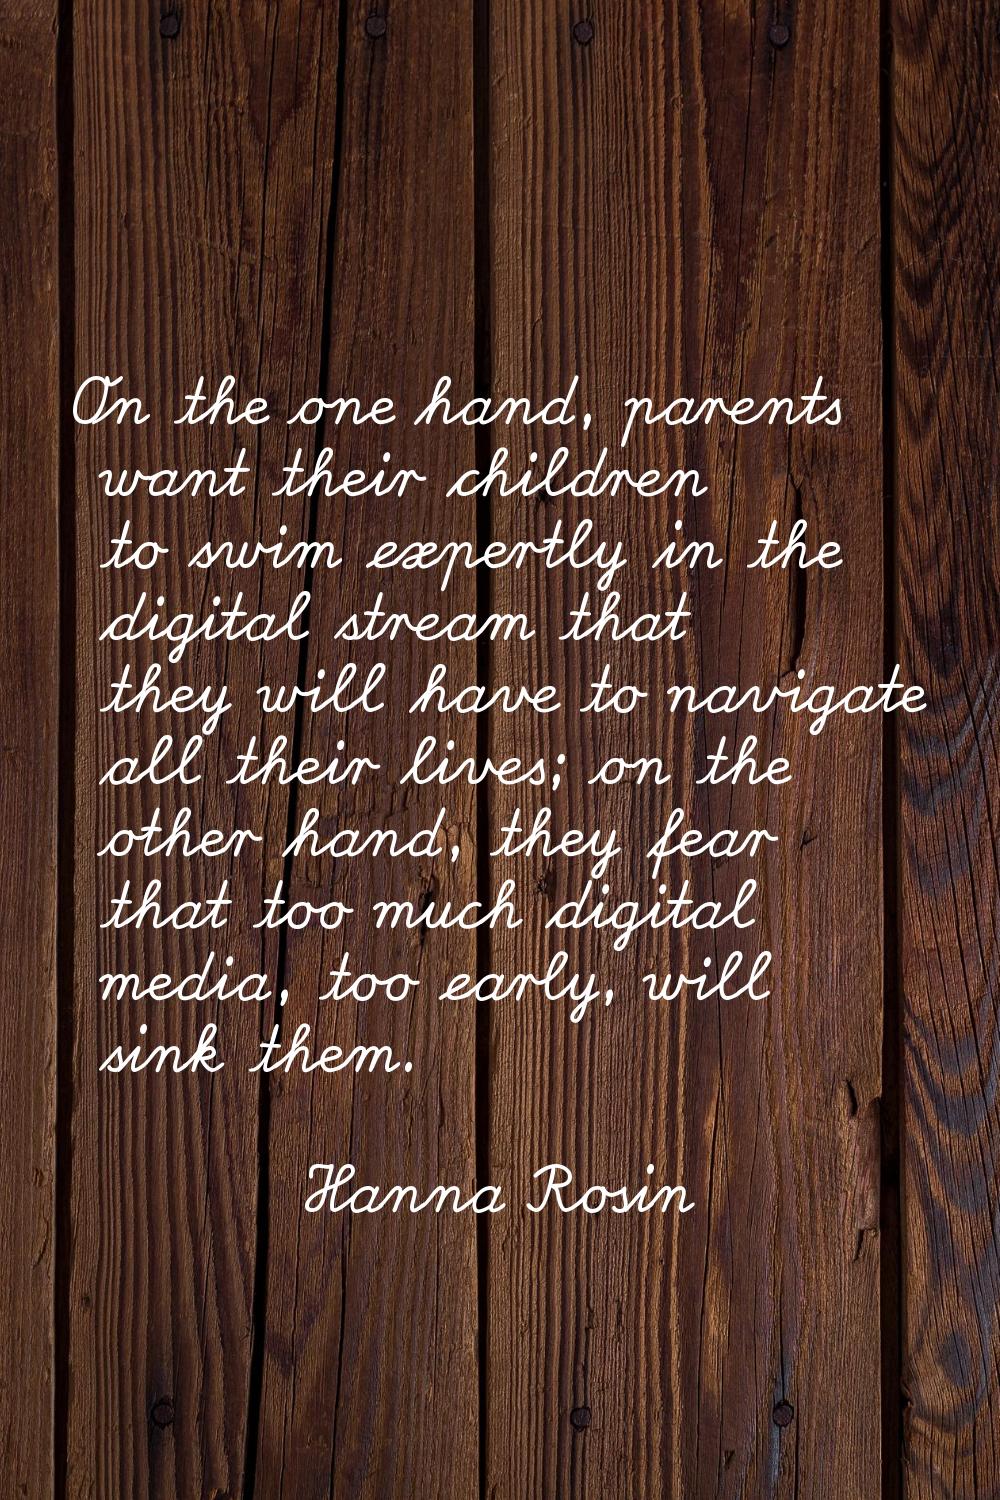 On the one hand, parents want their children to swim expertly in the digital stream that they will 